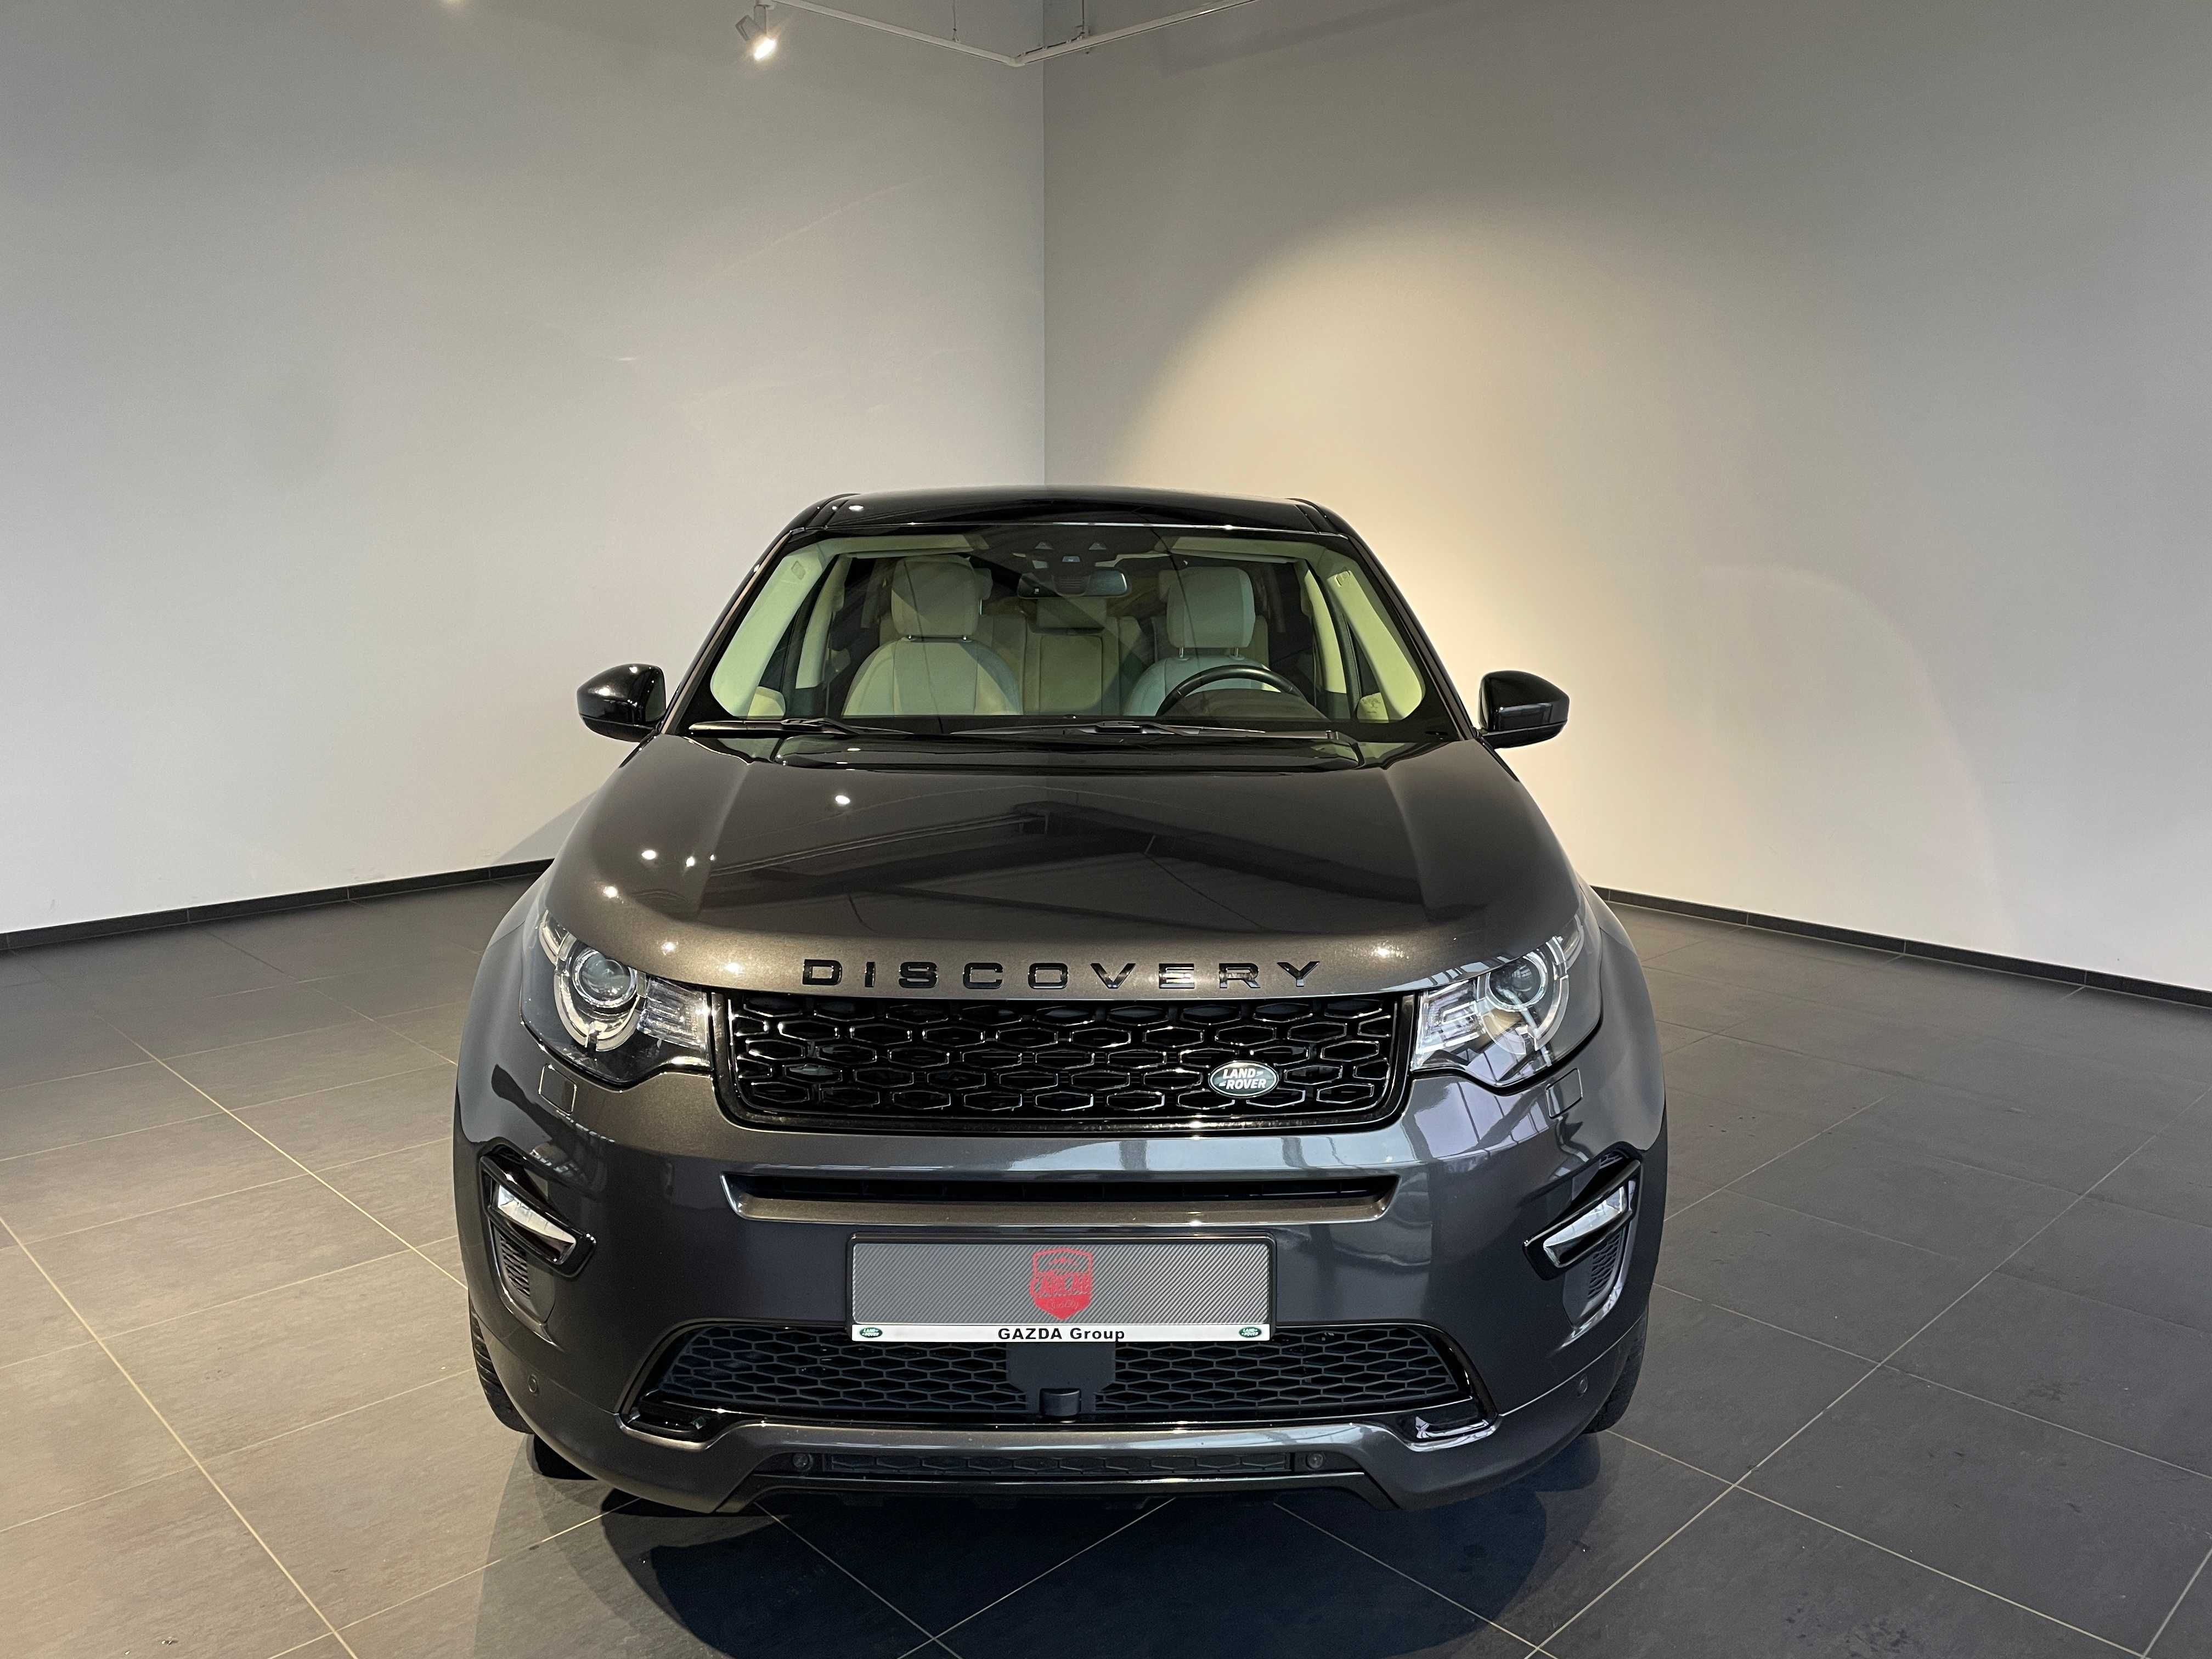 Land Rover Discovery Sport HSE Luxury 2.0 benzyna, 240KM, 2019r.